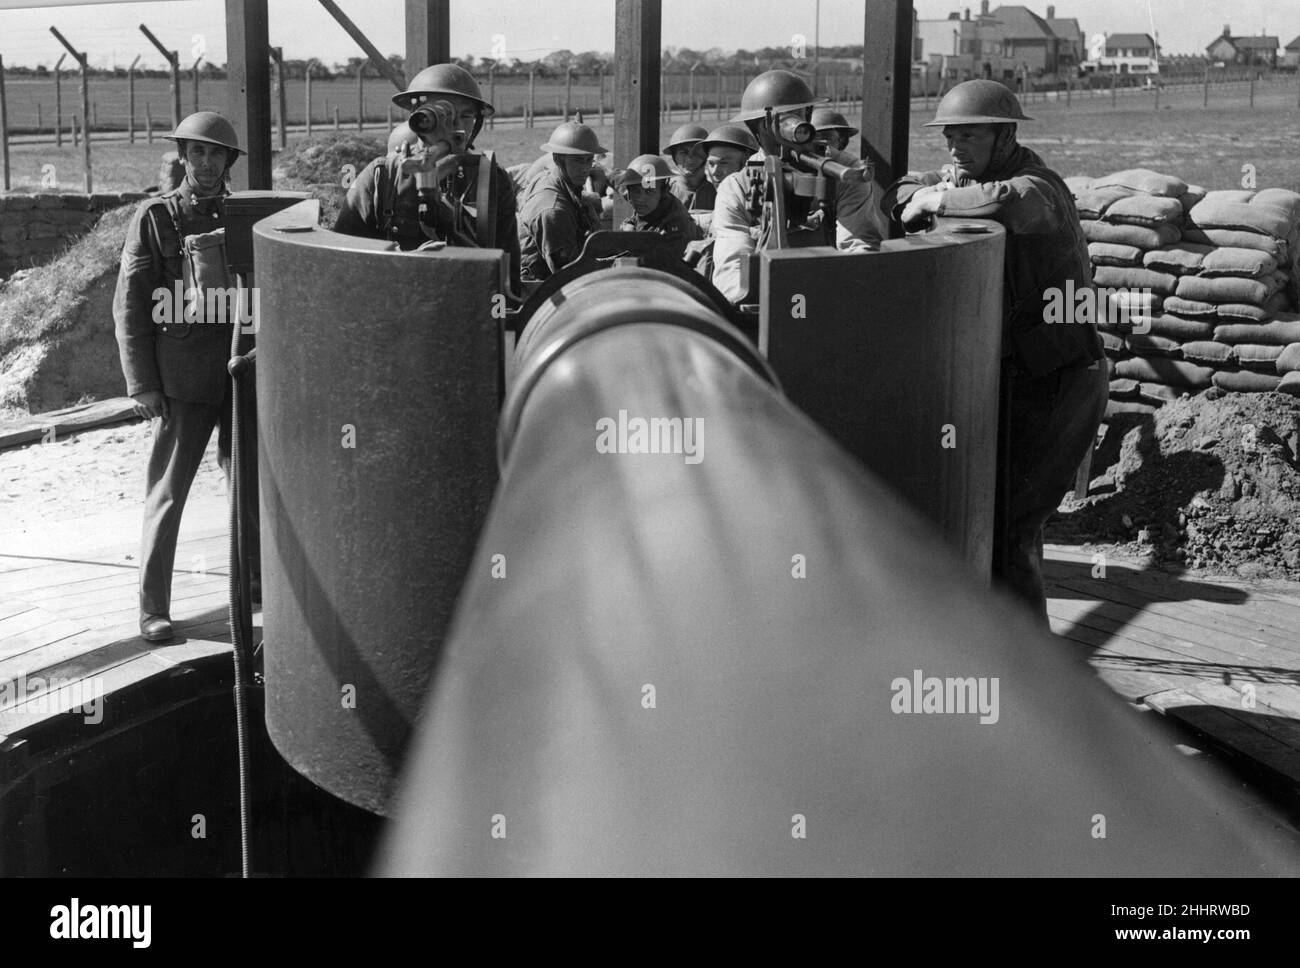 Anti aircraft spotters and gunners of the Britsh Army on the look out for enemy aircraft during the Second World War. 24th May 1940. Stock Photo